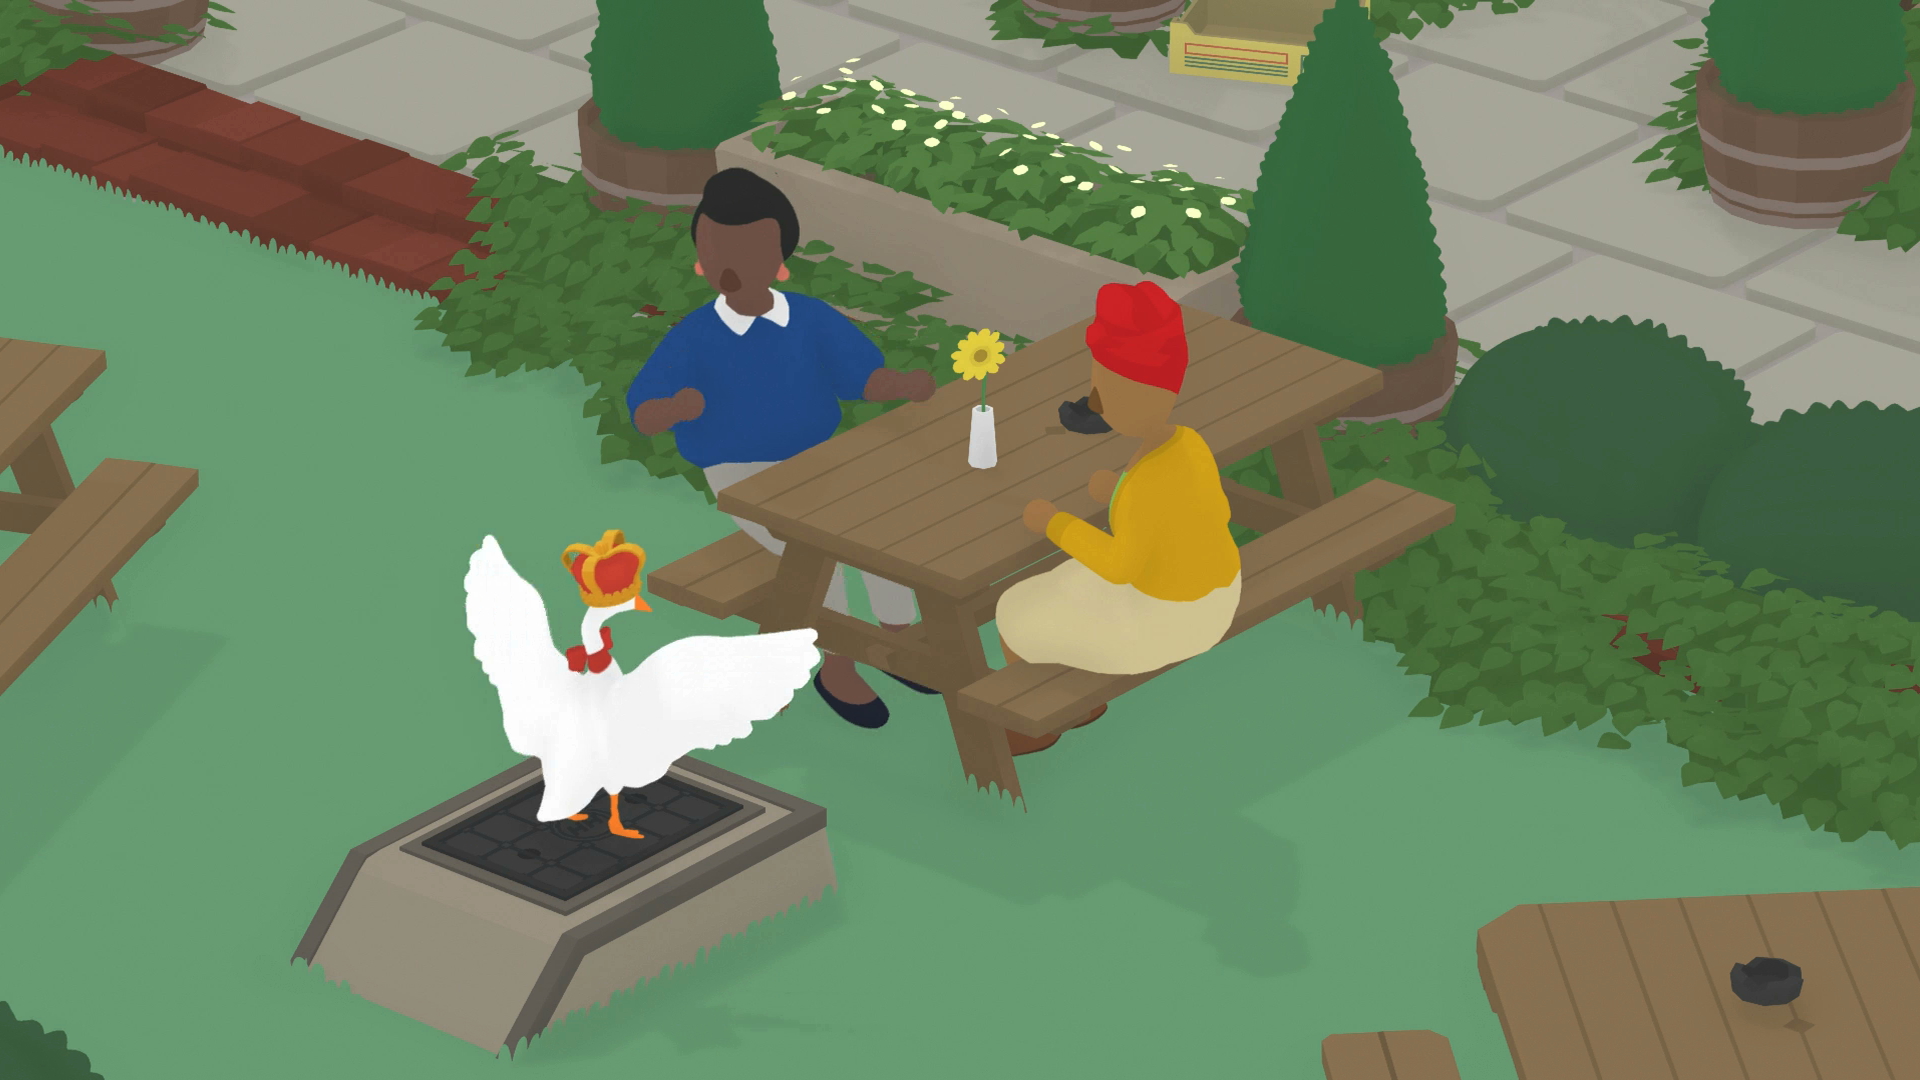 Untitled Goose Game nabs Game of the Year at the 2020 Game